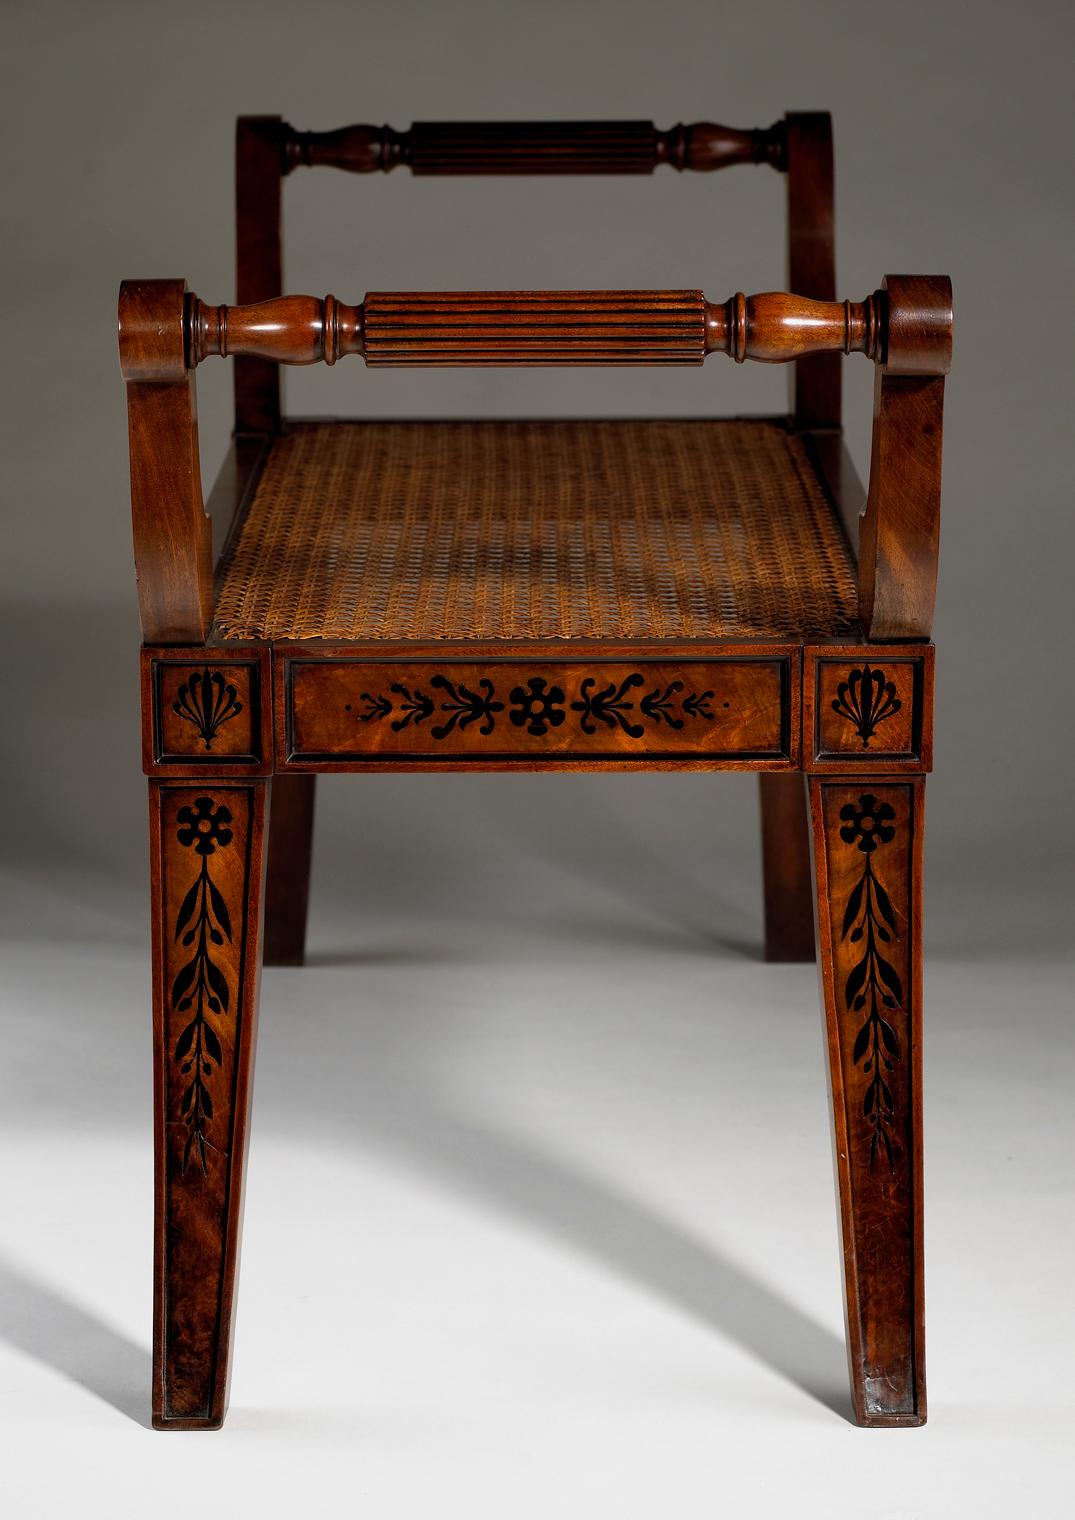 Pair of early 19th century neo Etruscan mahogany window seats with scroll arms, and sabre legs, the flat side panels with black banding and inlaid with anthemions and paterae, stylised foliate details, husks and dots. The seats with recent caning